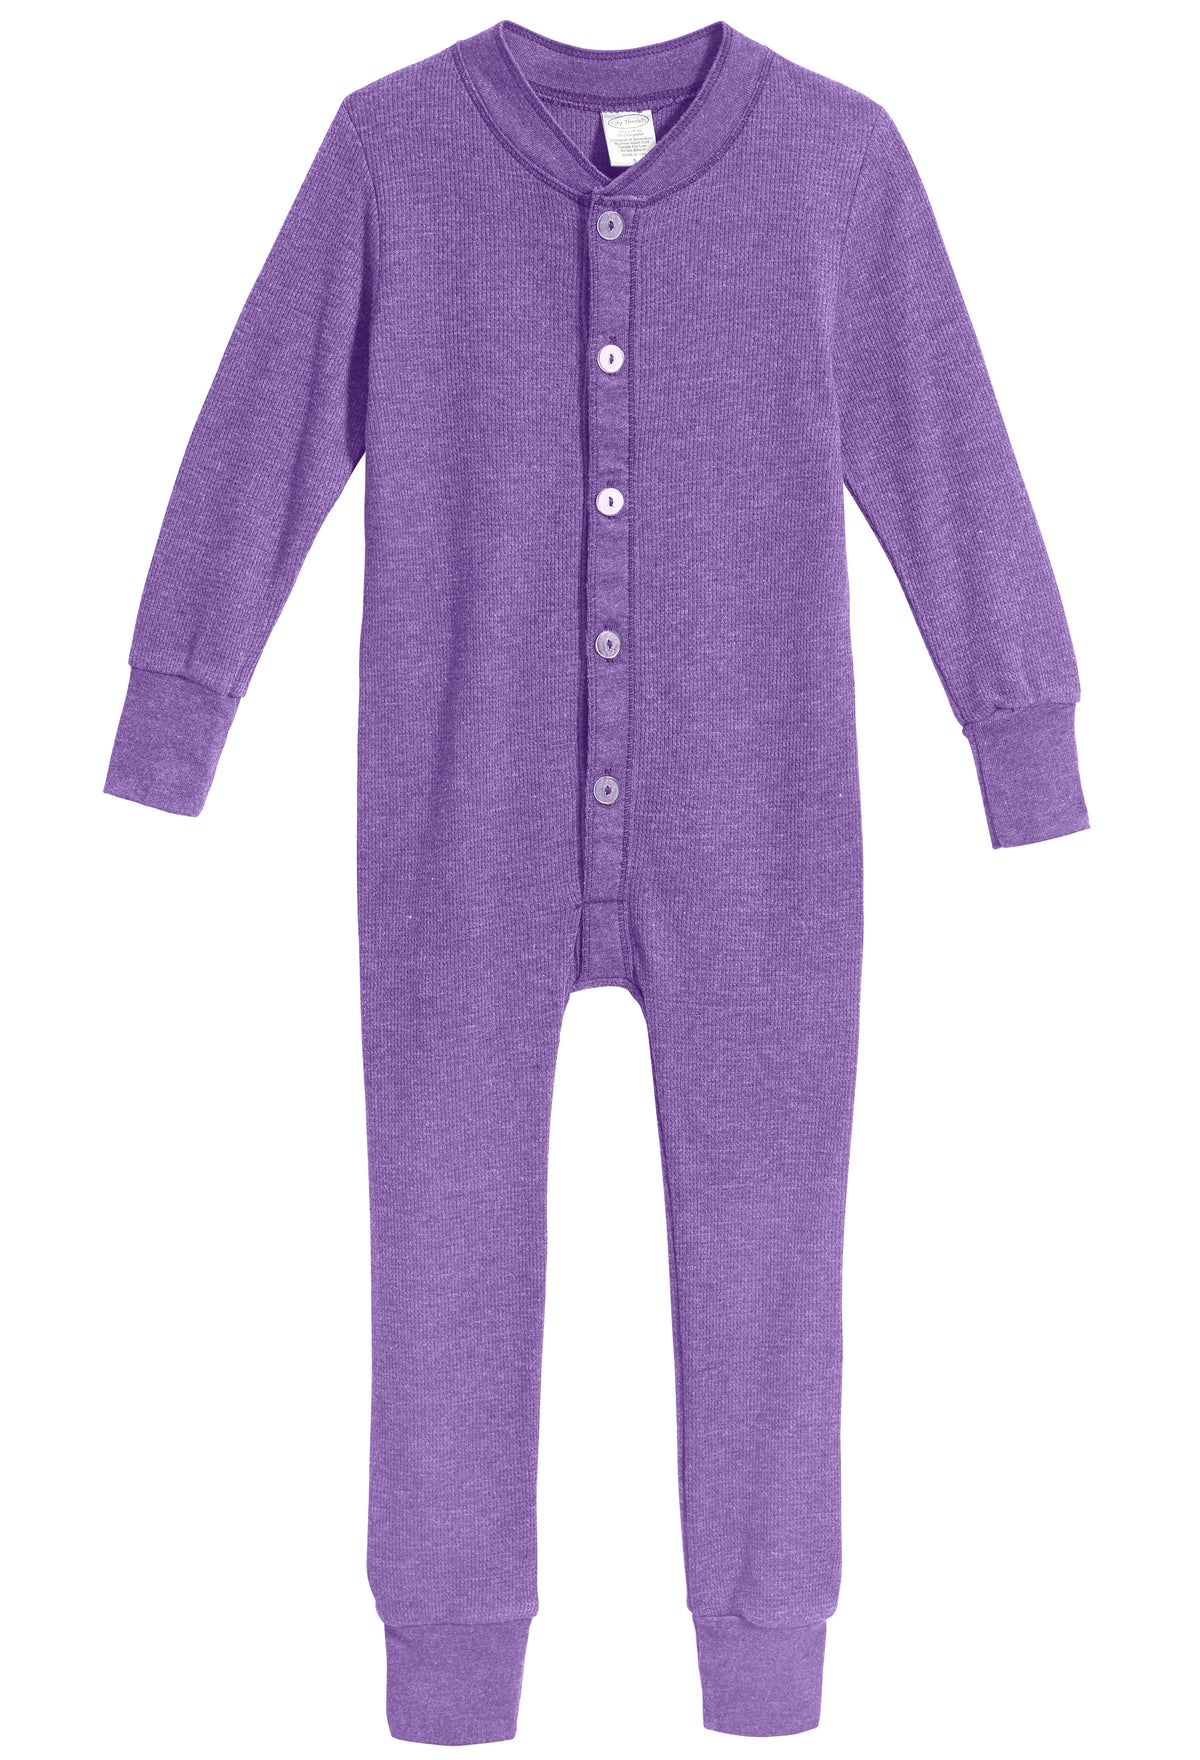 Boys and Girls Soft &amp; Cozy Thermal One- Piece Union Suit  | Deep Purple